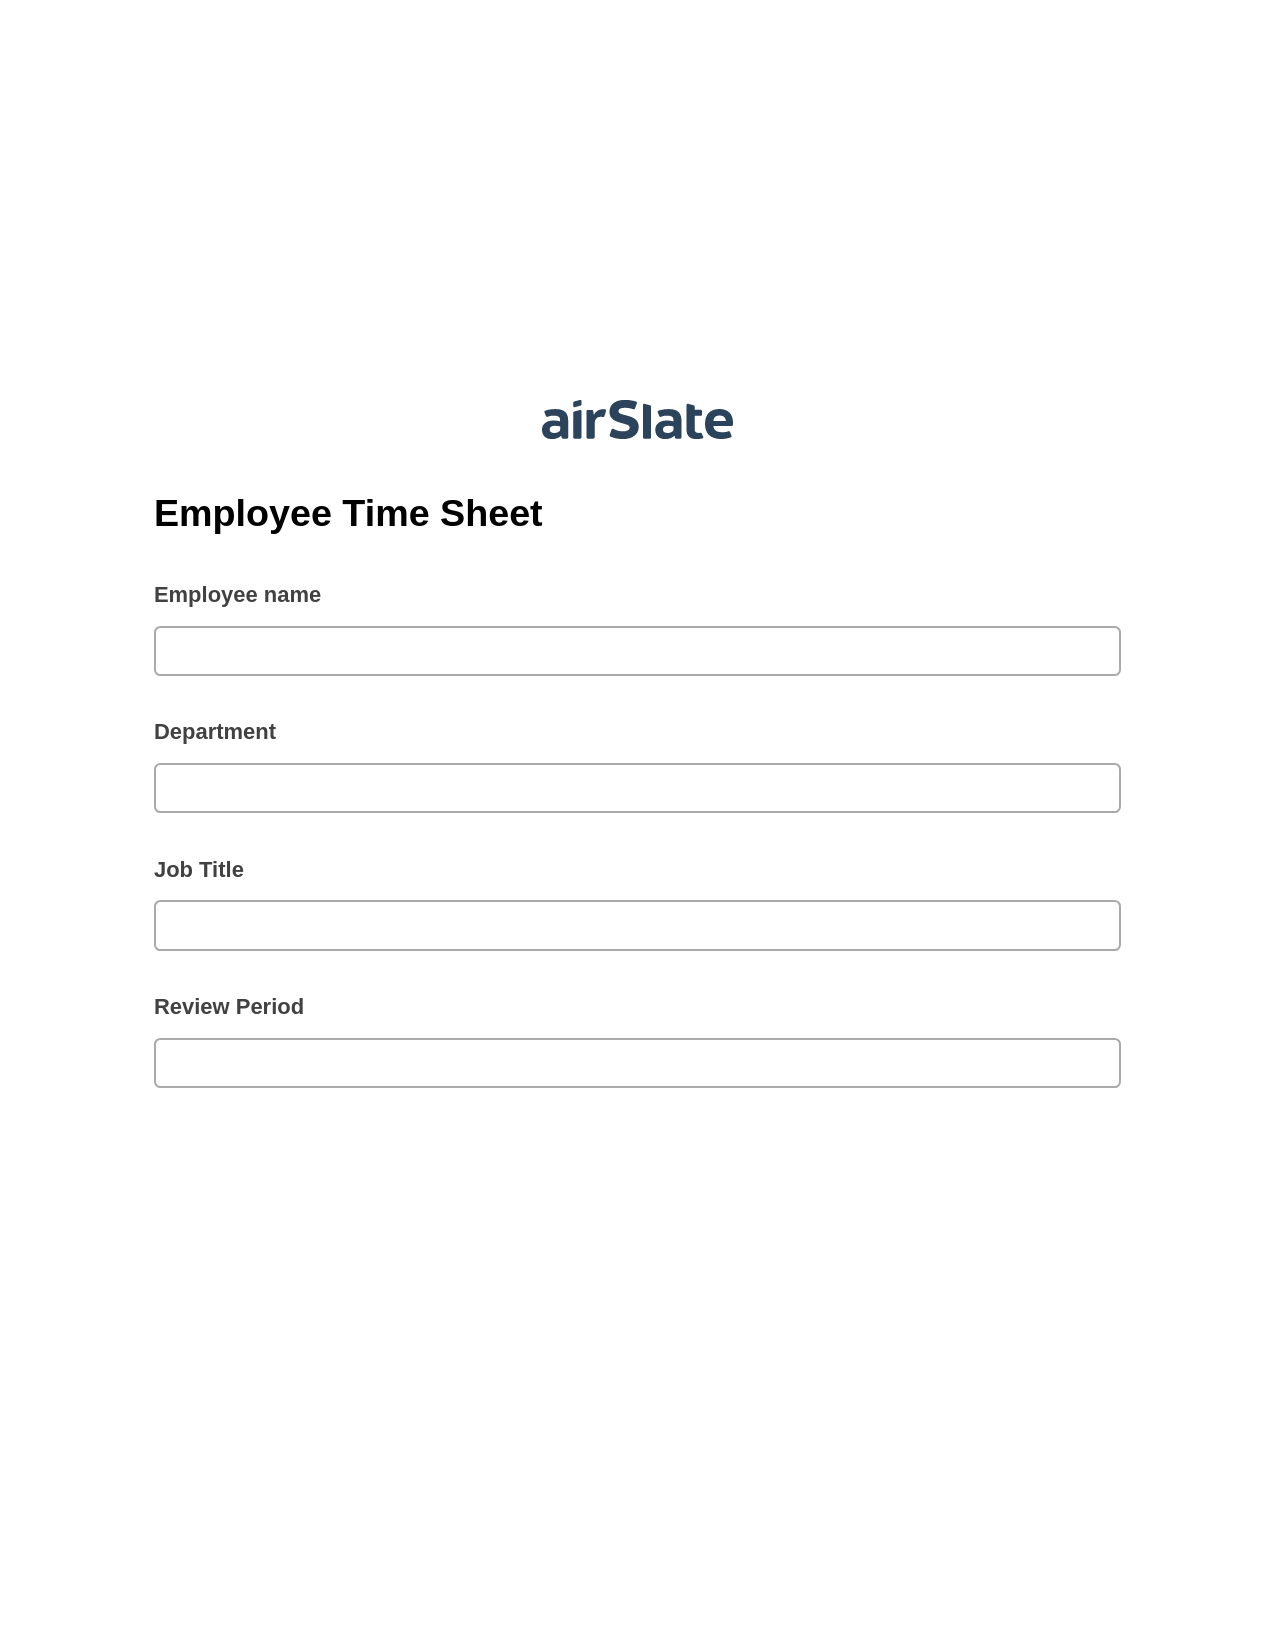 Employee Time Sheet Pre-fill from another Slate Bot, Update Audit Trail Bot, Export to NetSuite Bot